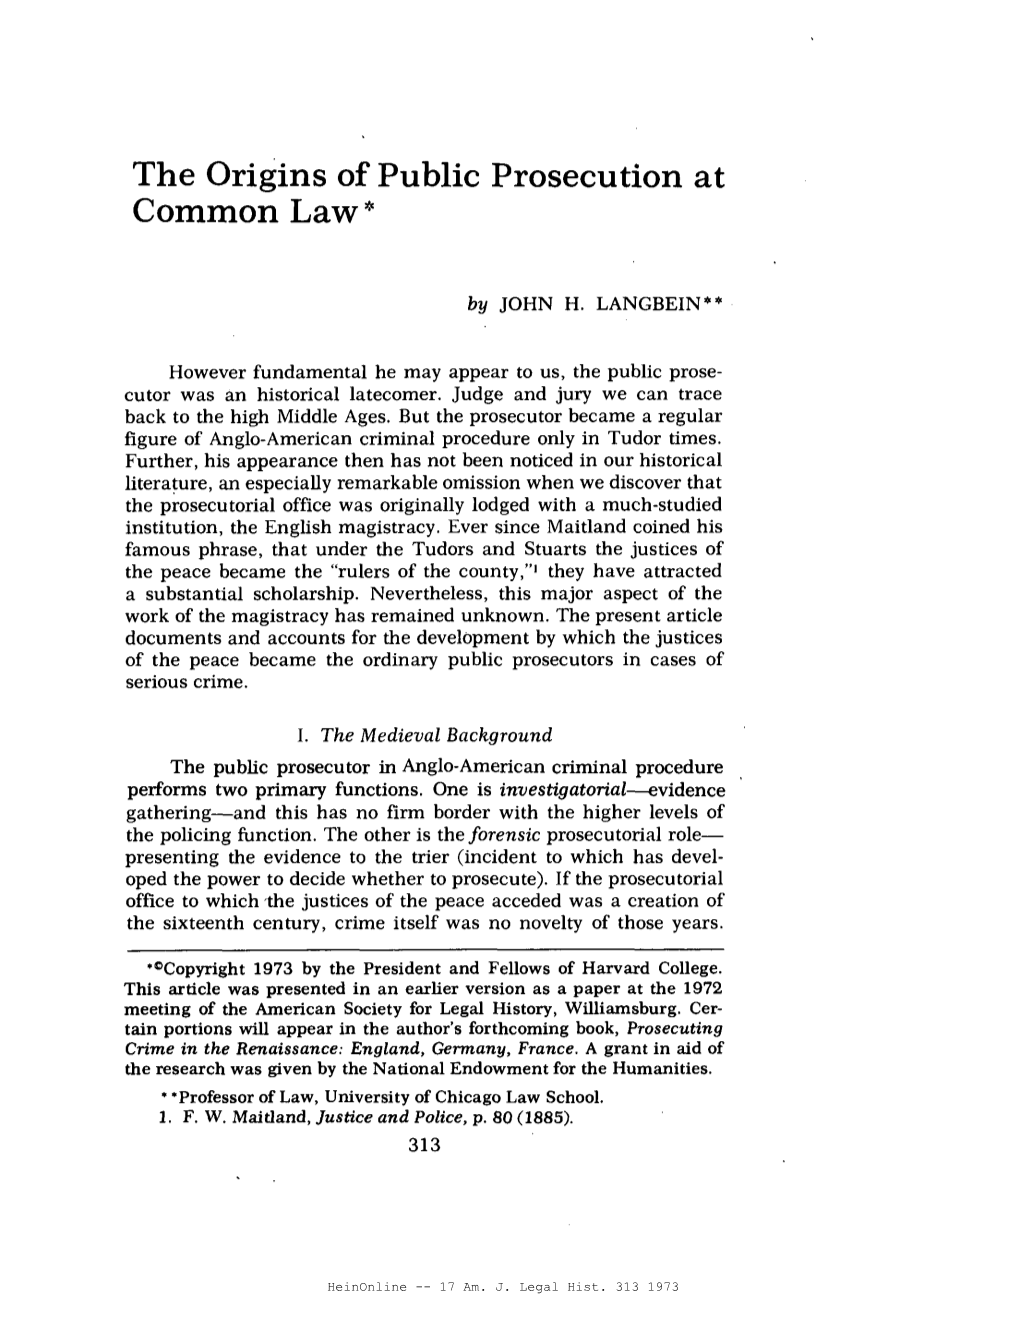 The Origins of Public Prosecution at Common Law*